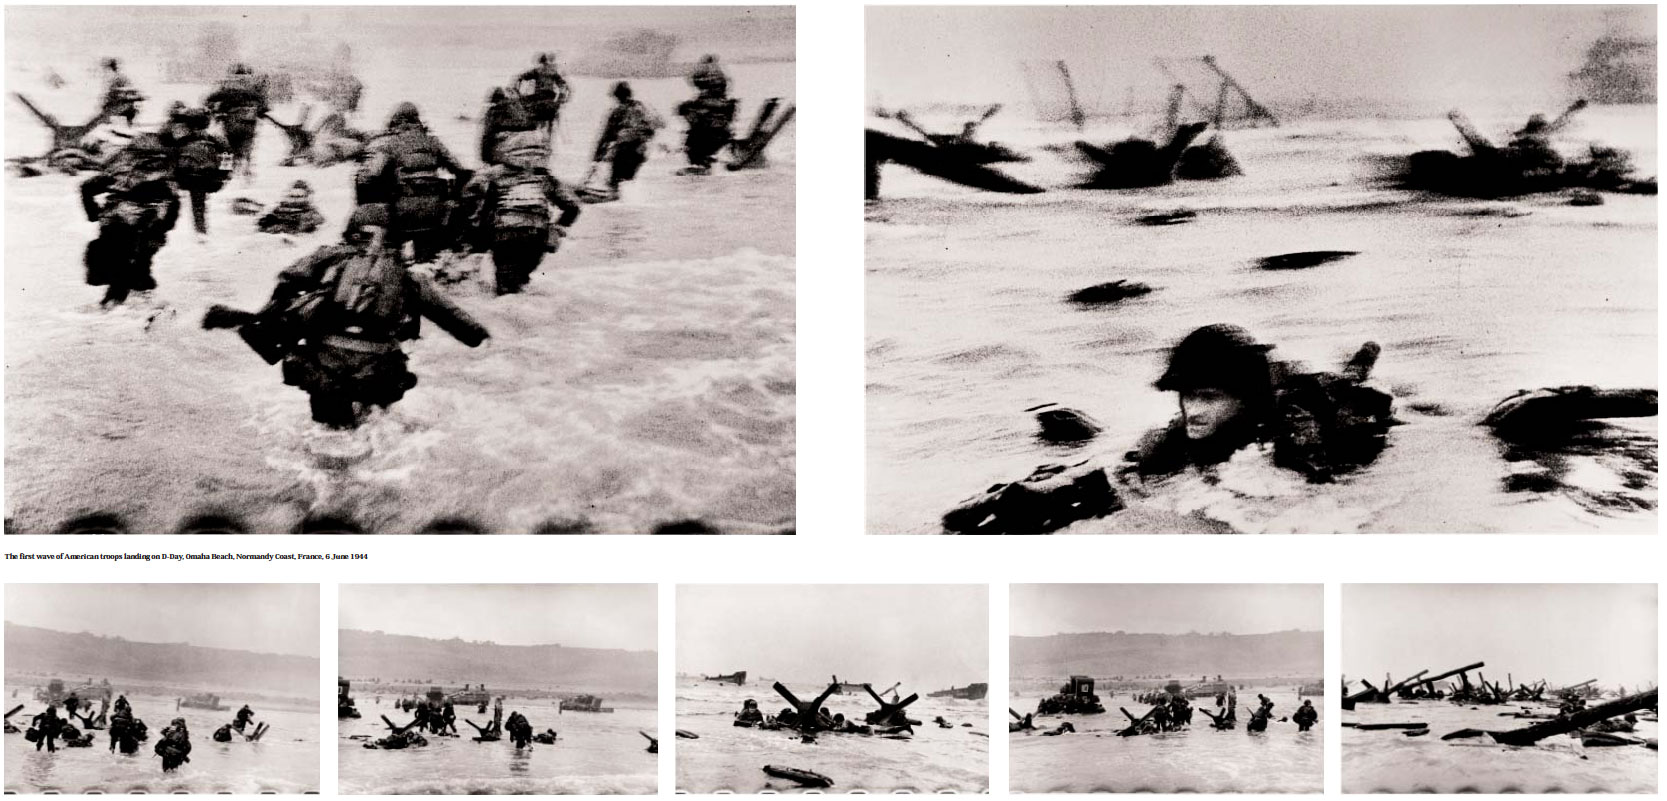 The first wave of American troops landing on D-Day,Omaha Beach, Normandy Coast, France, 6 June 1944, by Robert Capa. As presented in our book Magnum Stories